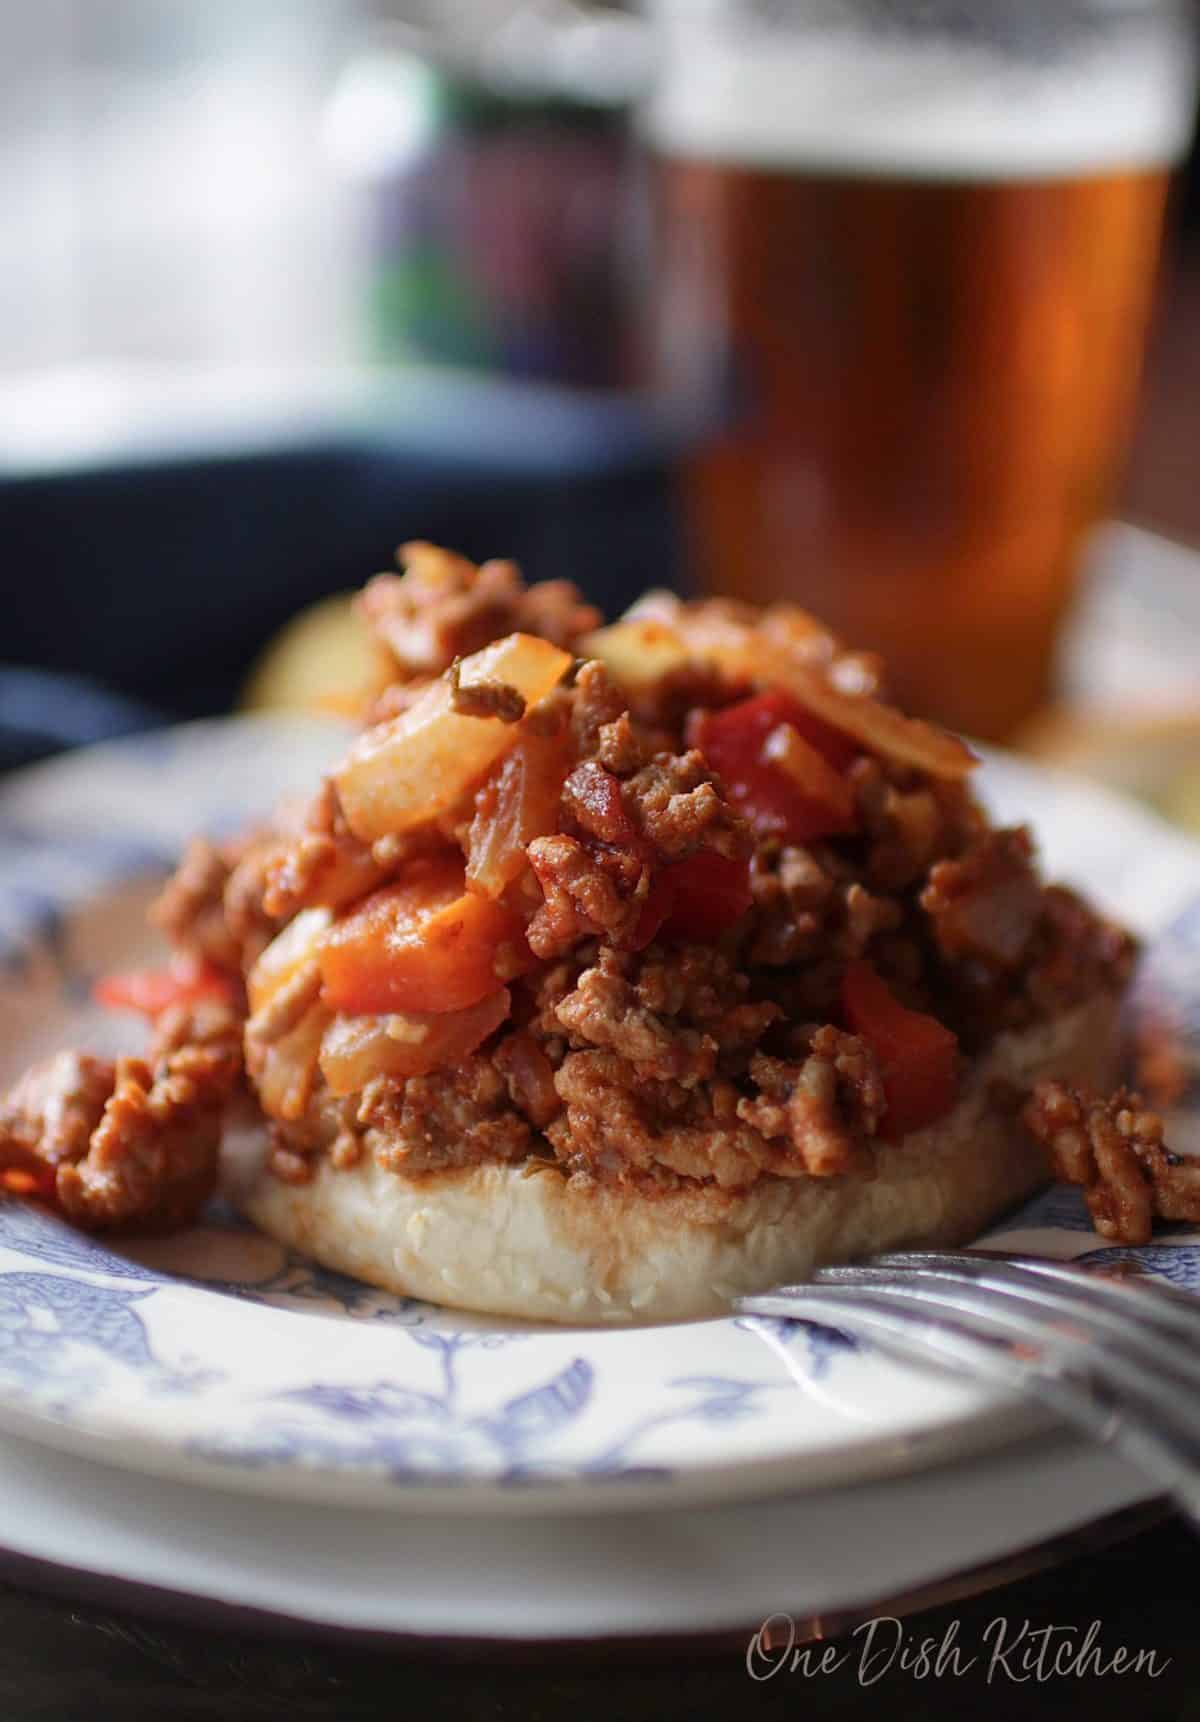 An open faced sloppy joe without the top bun on a plate next to a pint glass of beer.